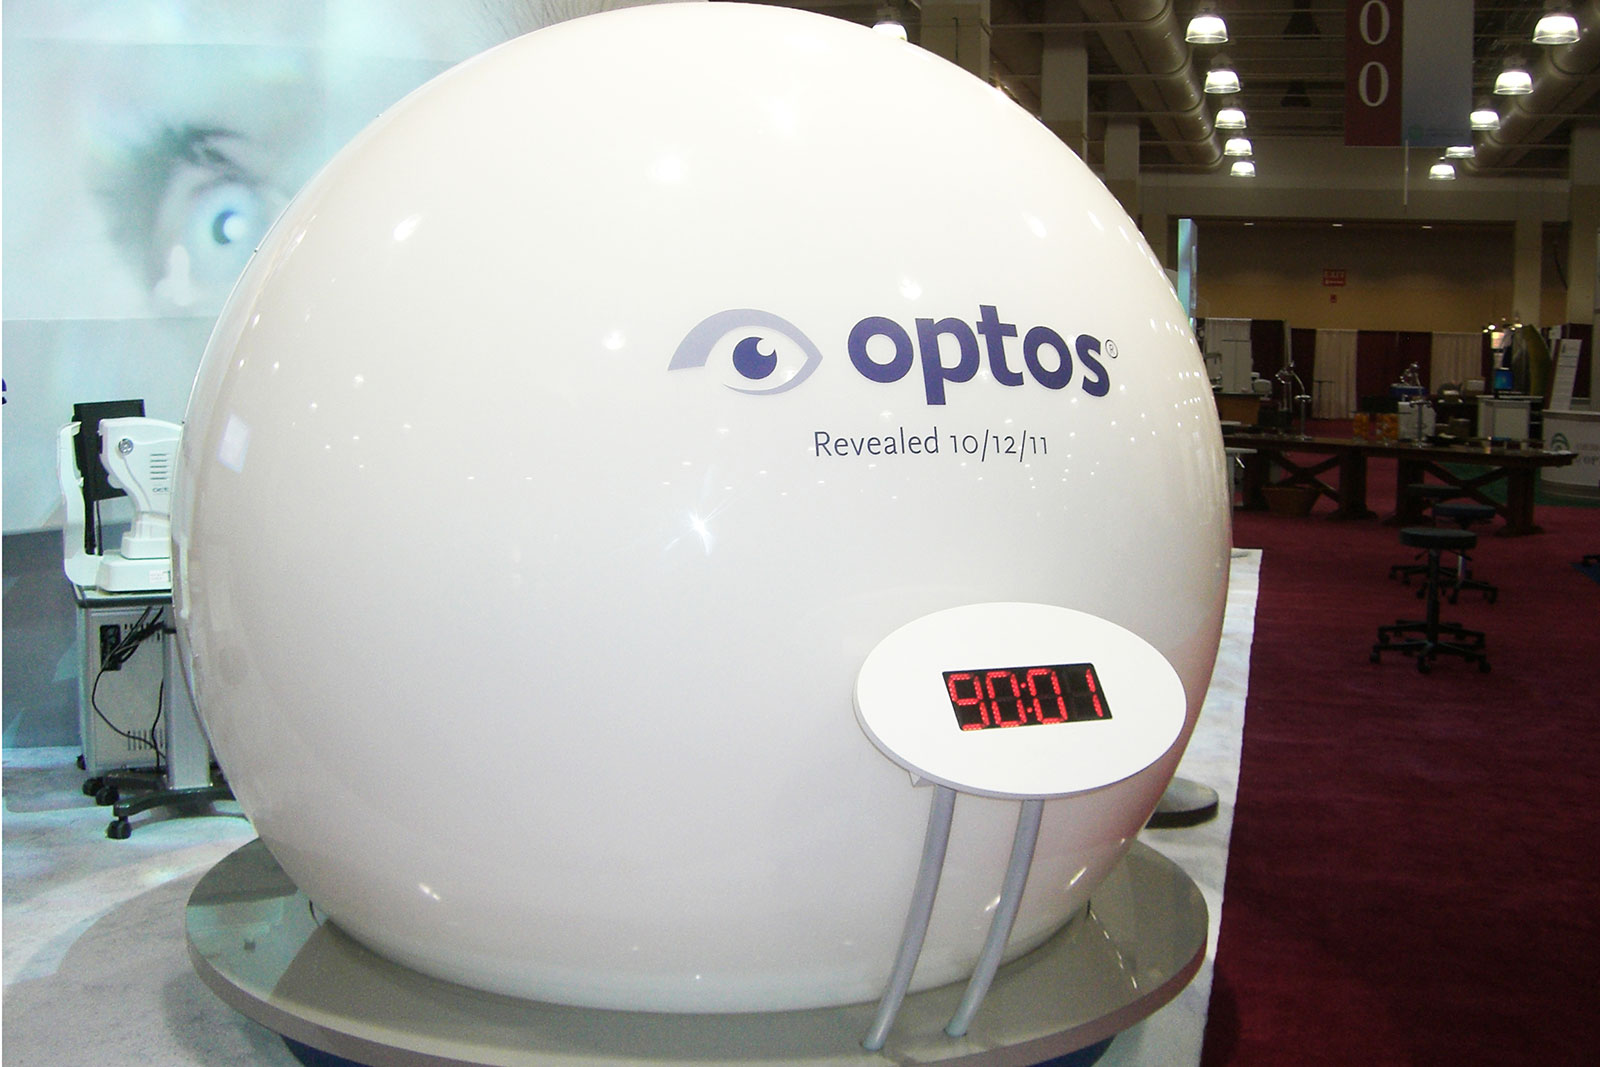 Custom Brand Environment for Optos at Academy of Optometry Trade Show, Product Launch